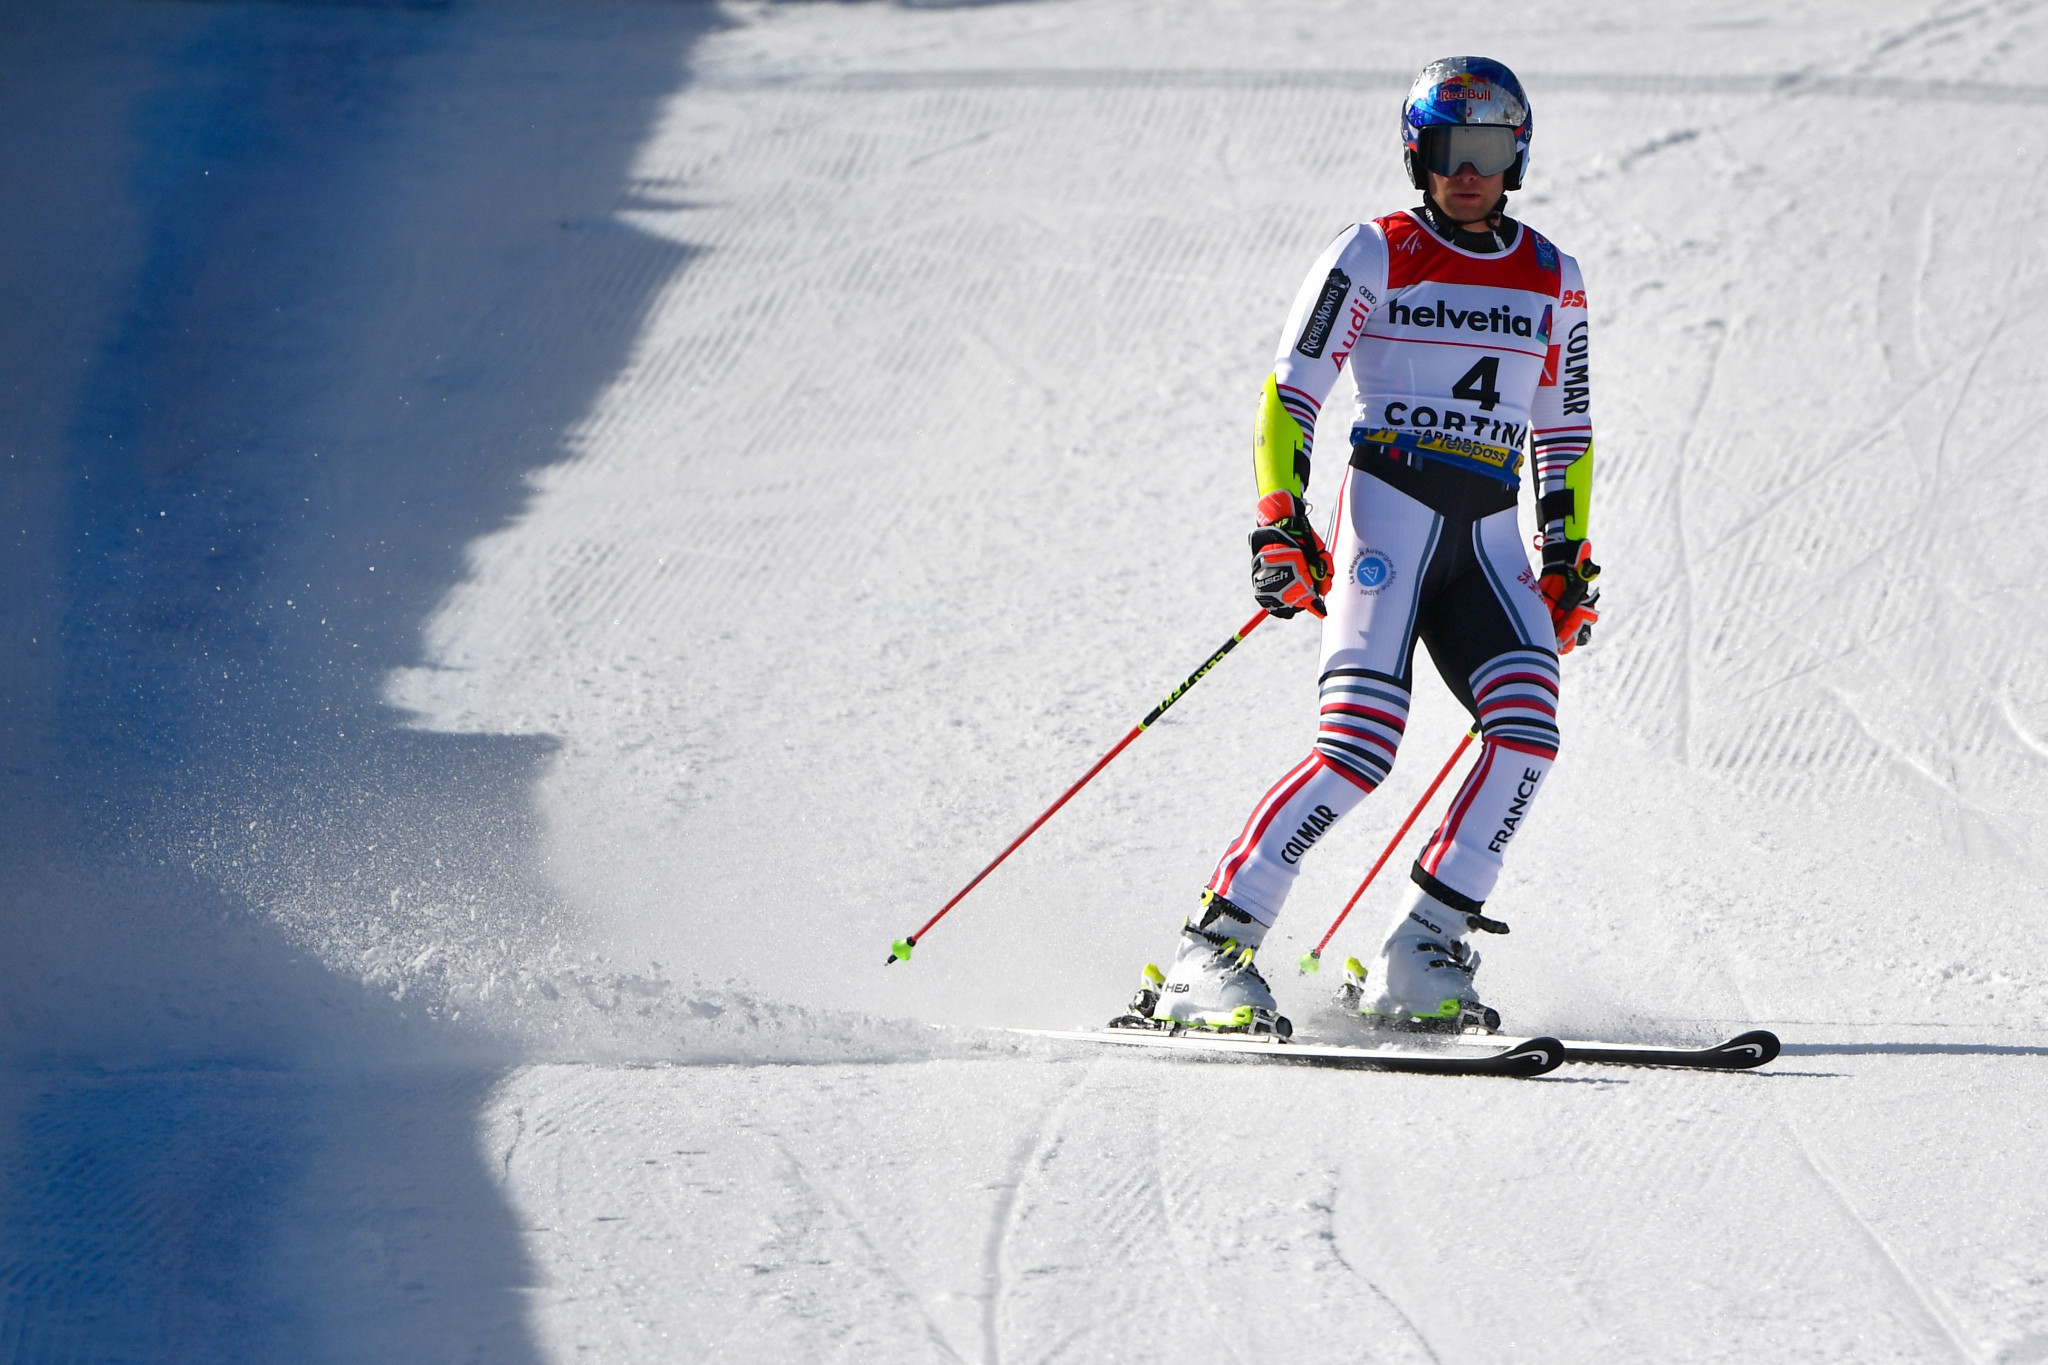 Alexis Pinturault saw his challenge ended by a fall in the second run ©Getty Images